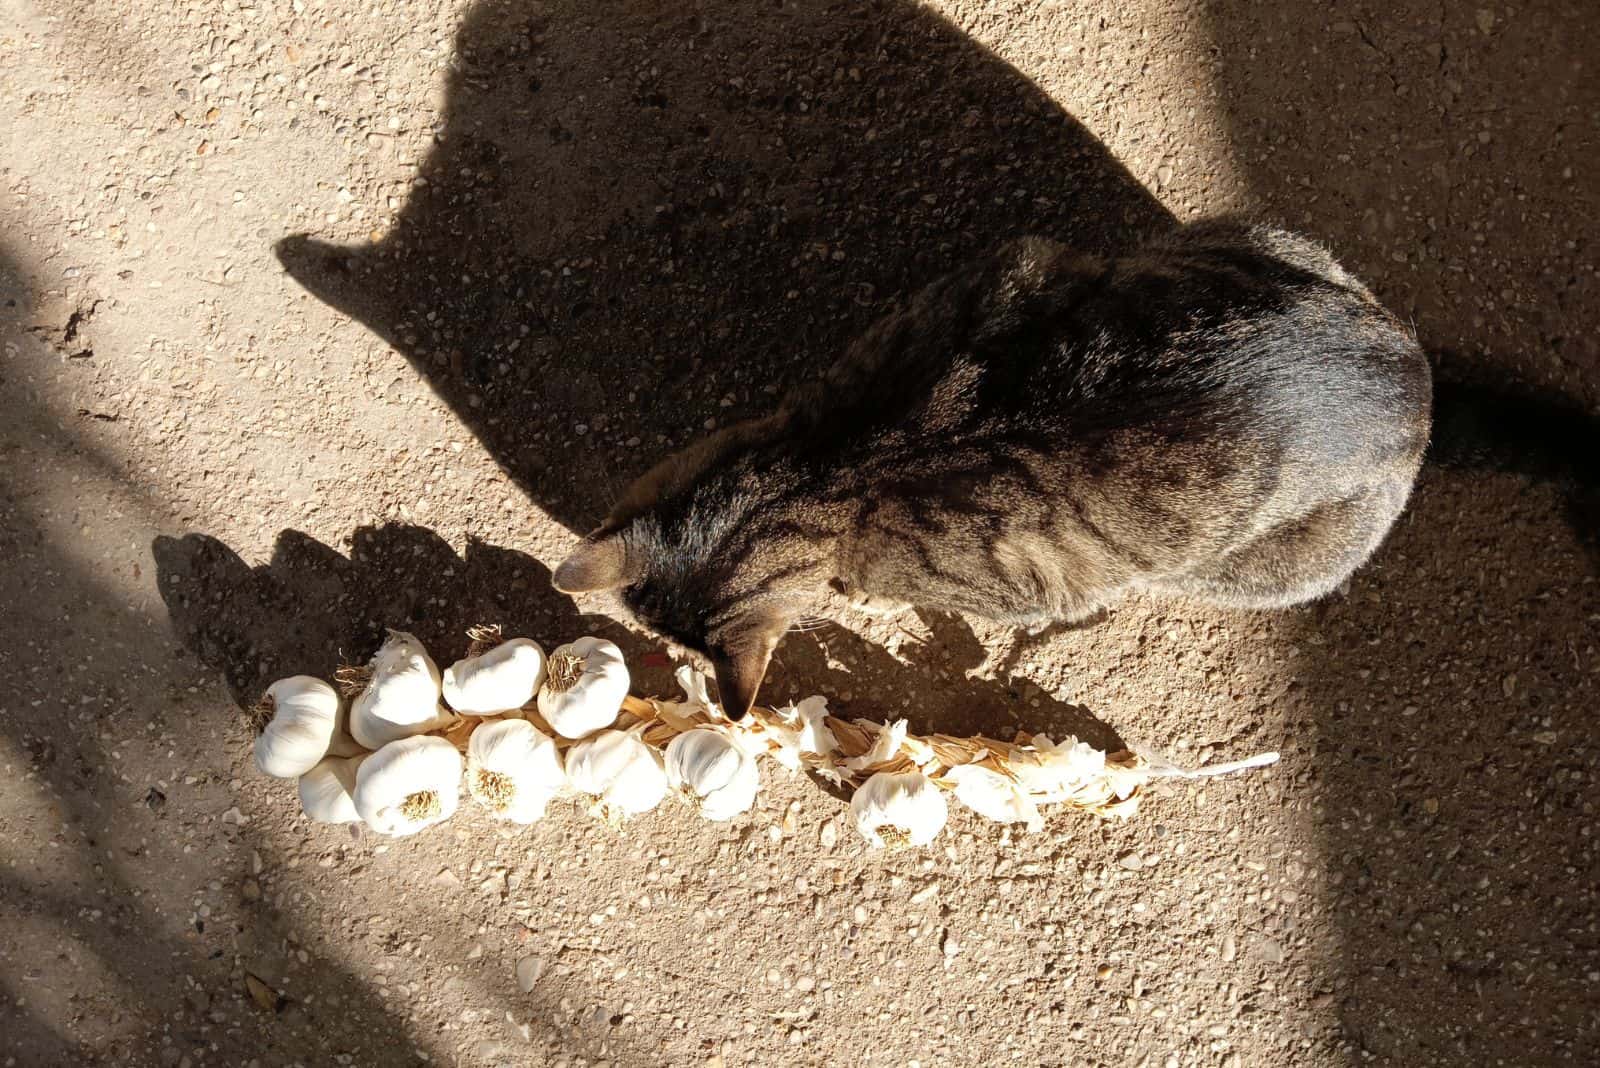 the cat is standing next to the garlic